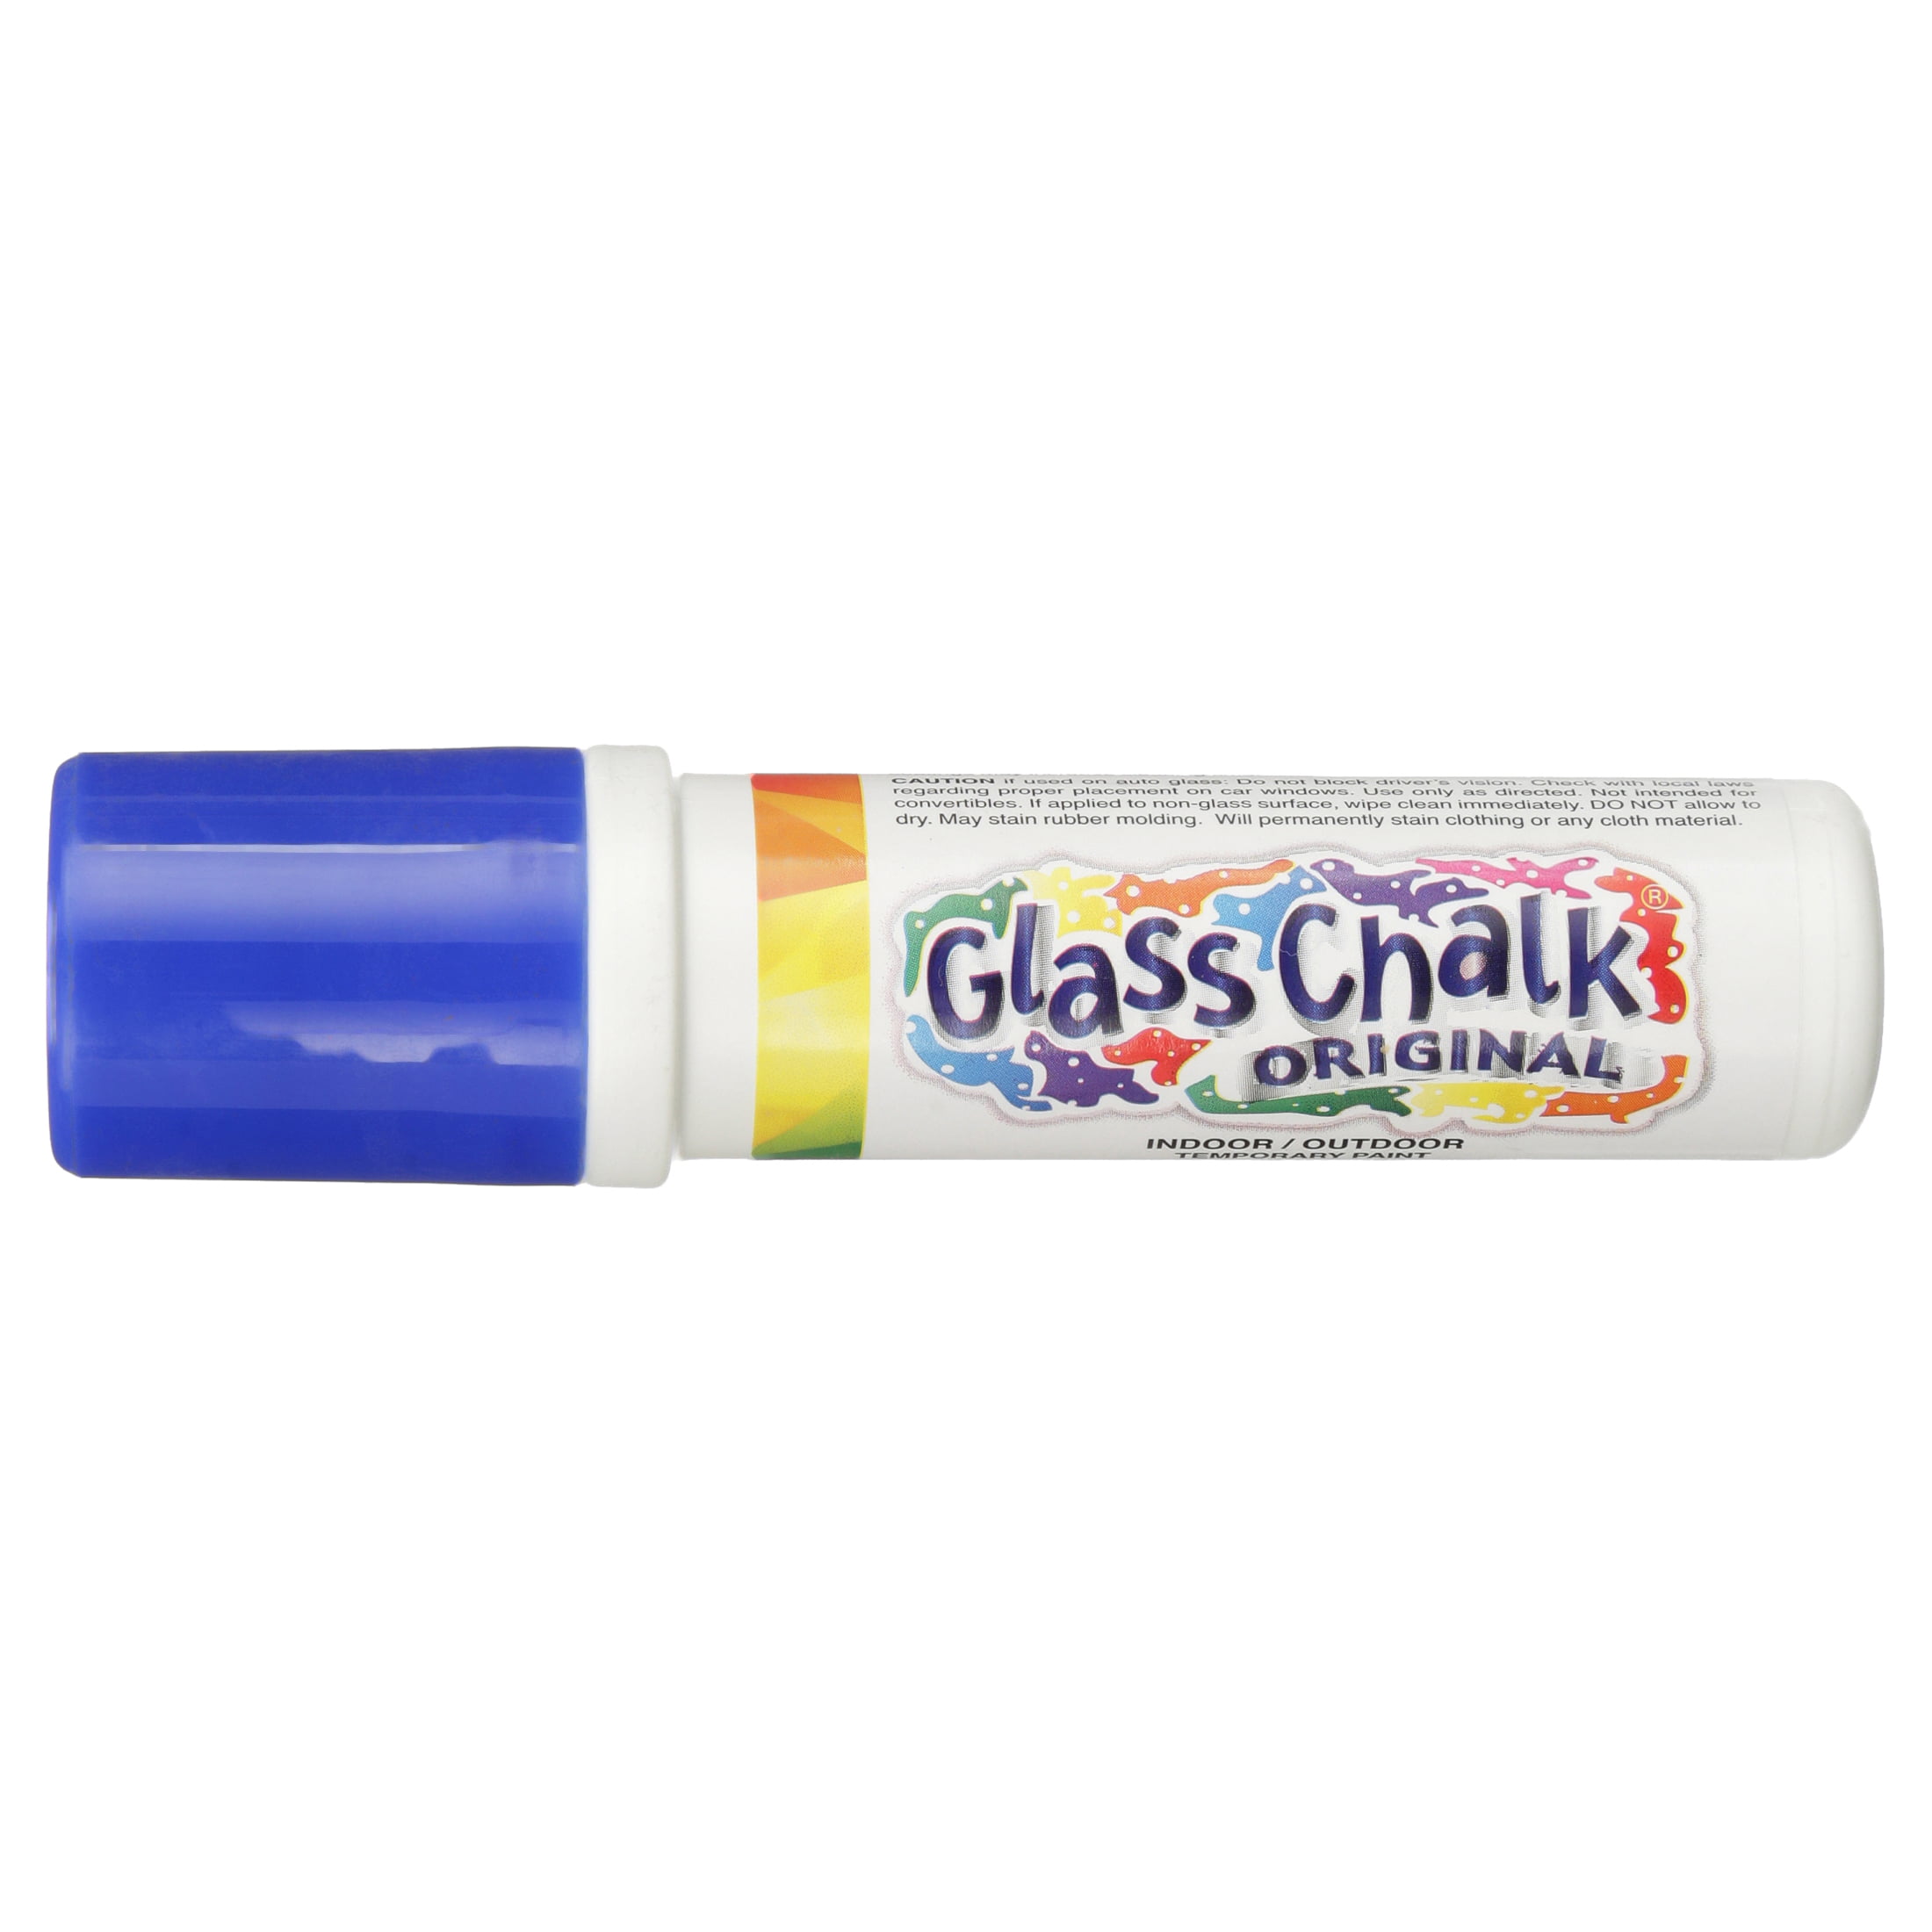 Glass Chalk the Original Patented Indoor/Outdoor Temporary Paint Marker for Auto  Windows and Surfaces, Black and Red, 2 Piece